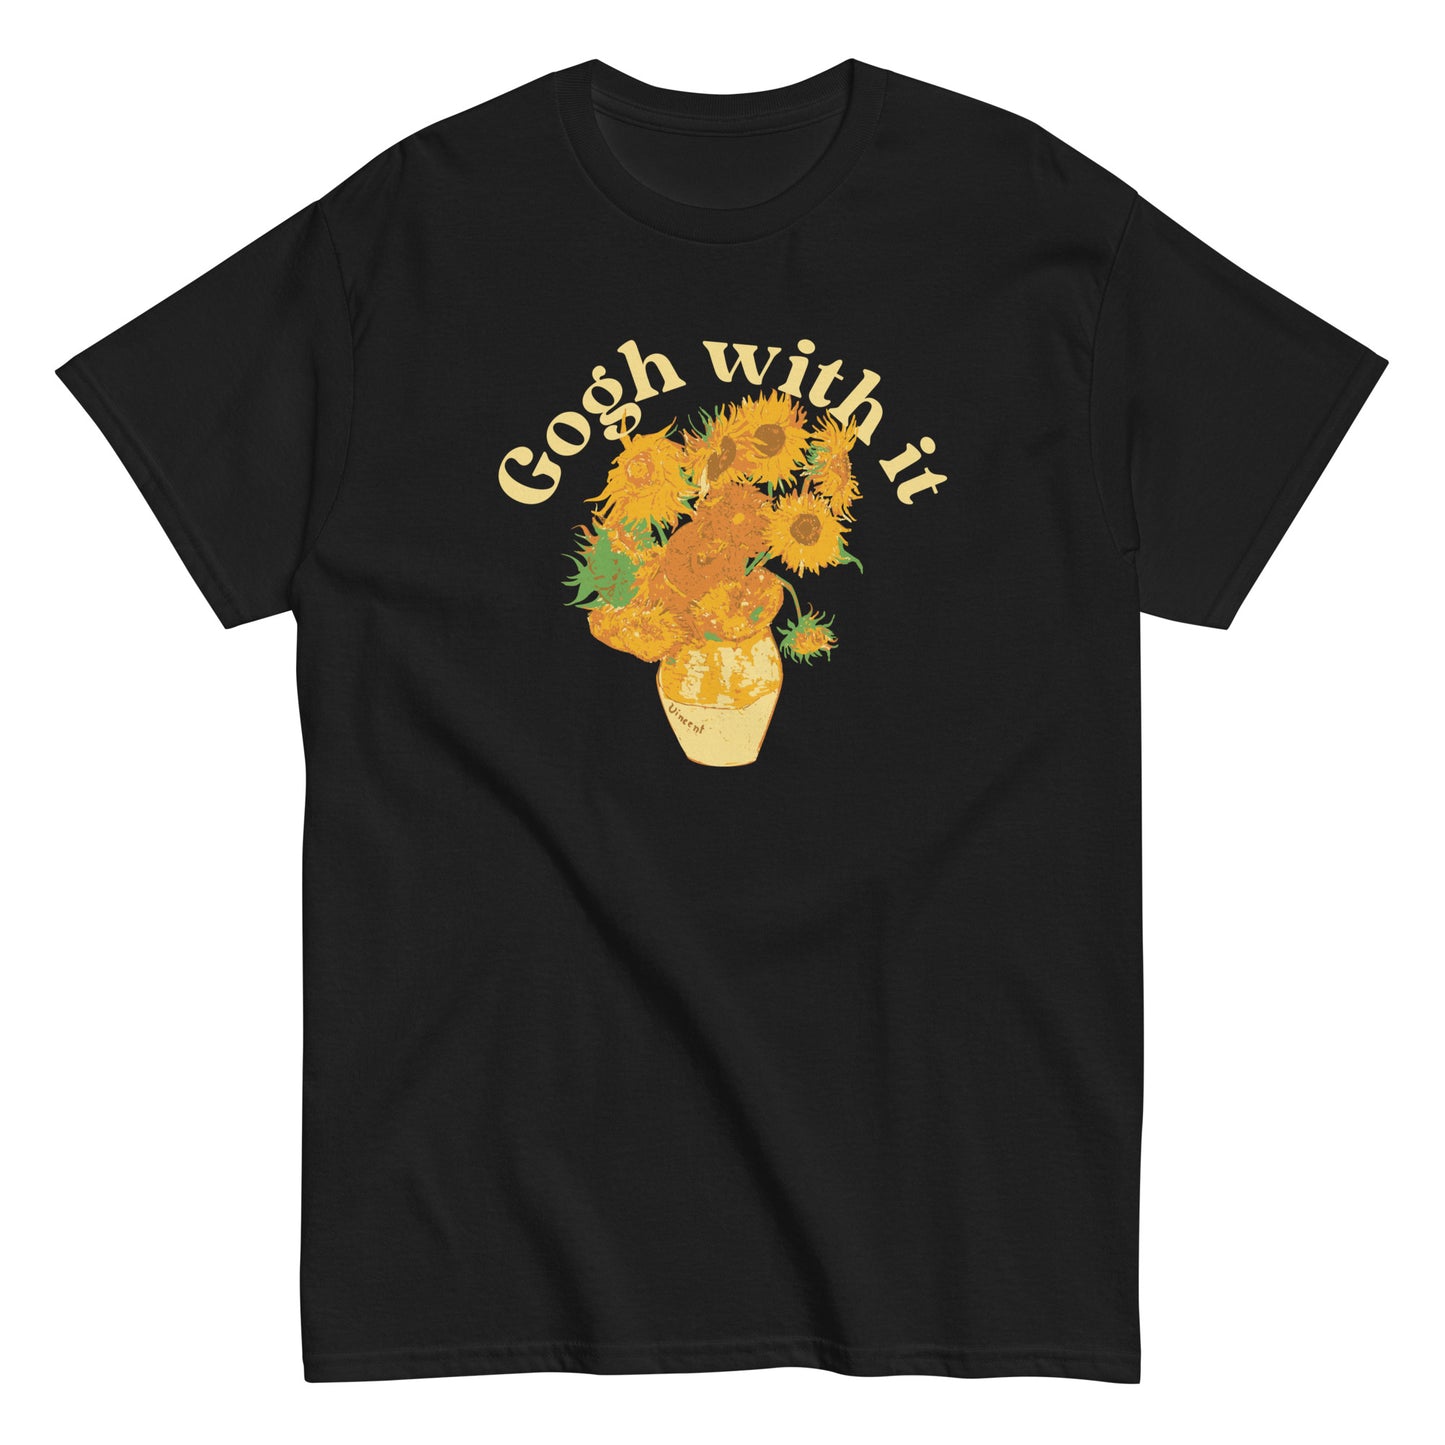 Gogh With It Men's Classic Tee